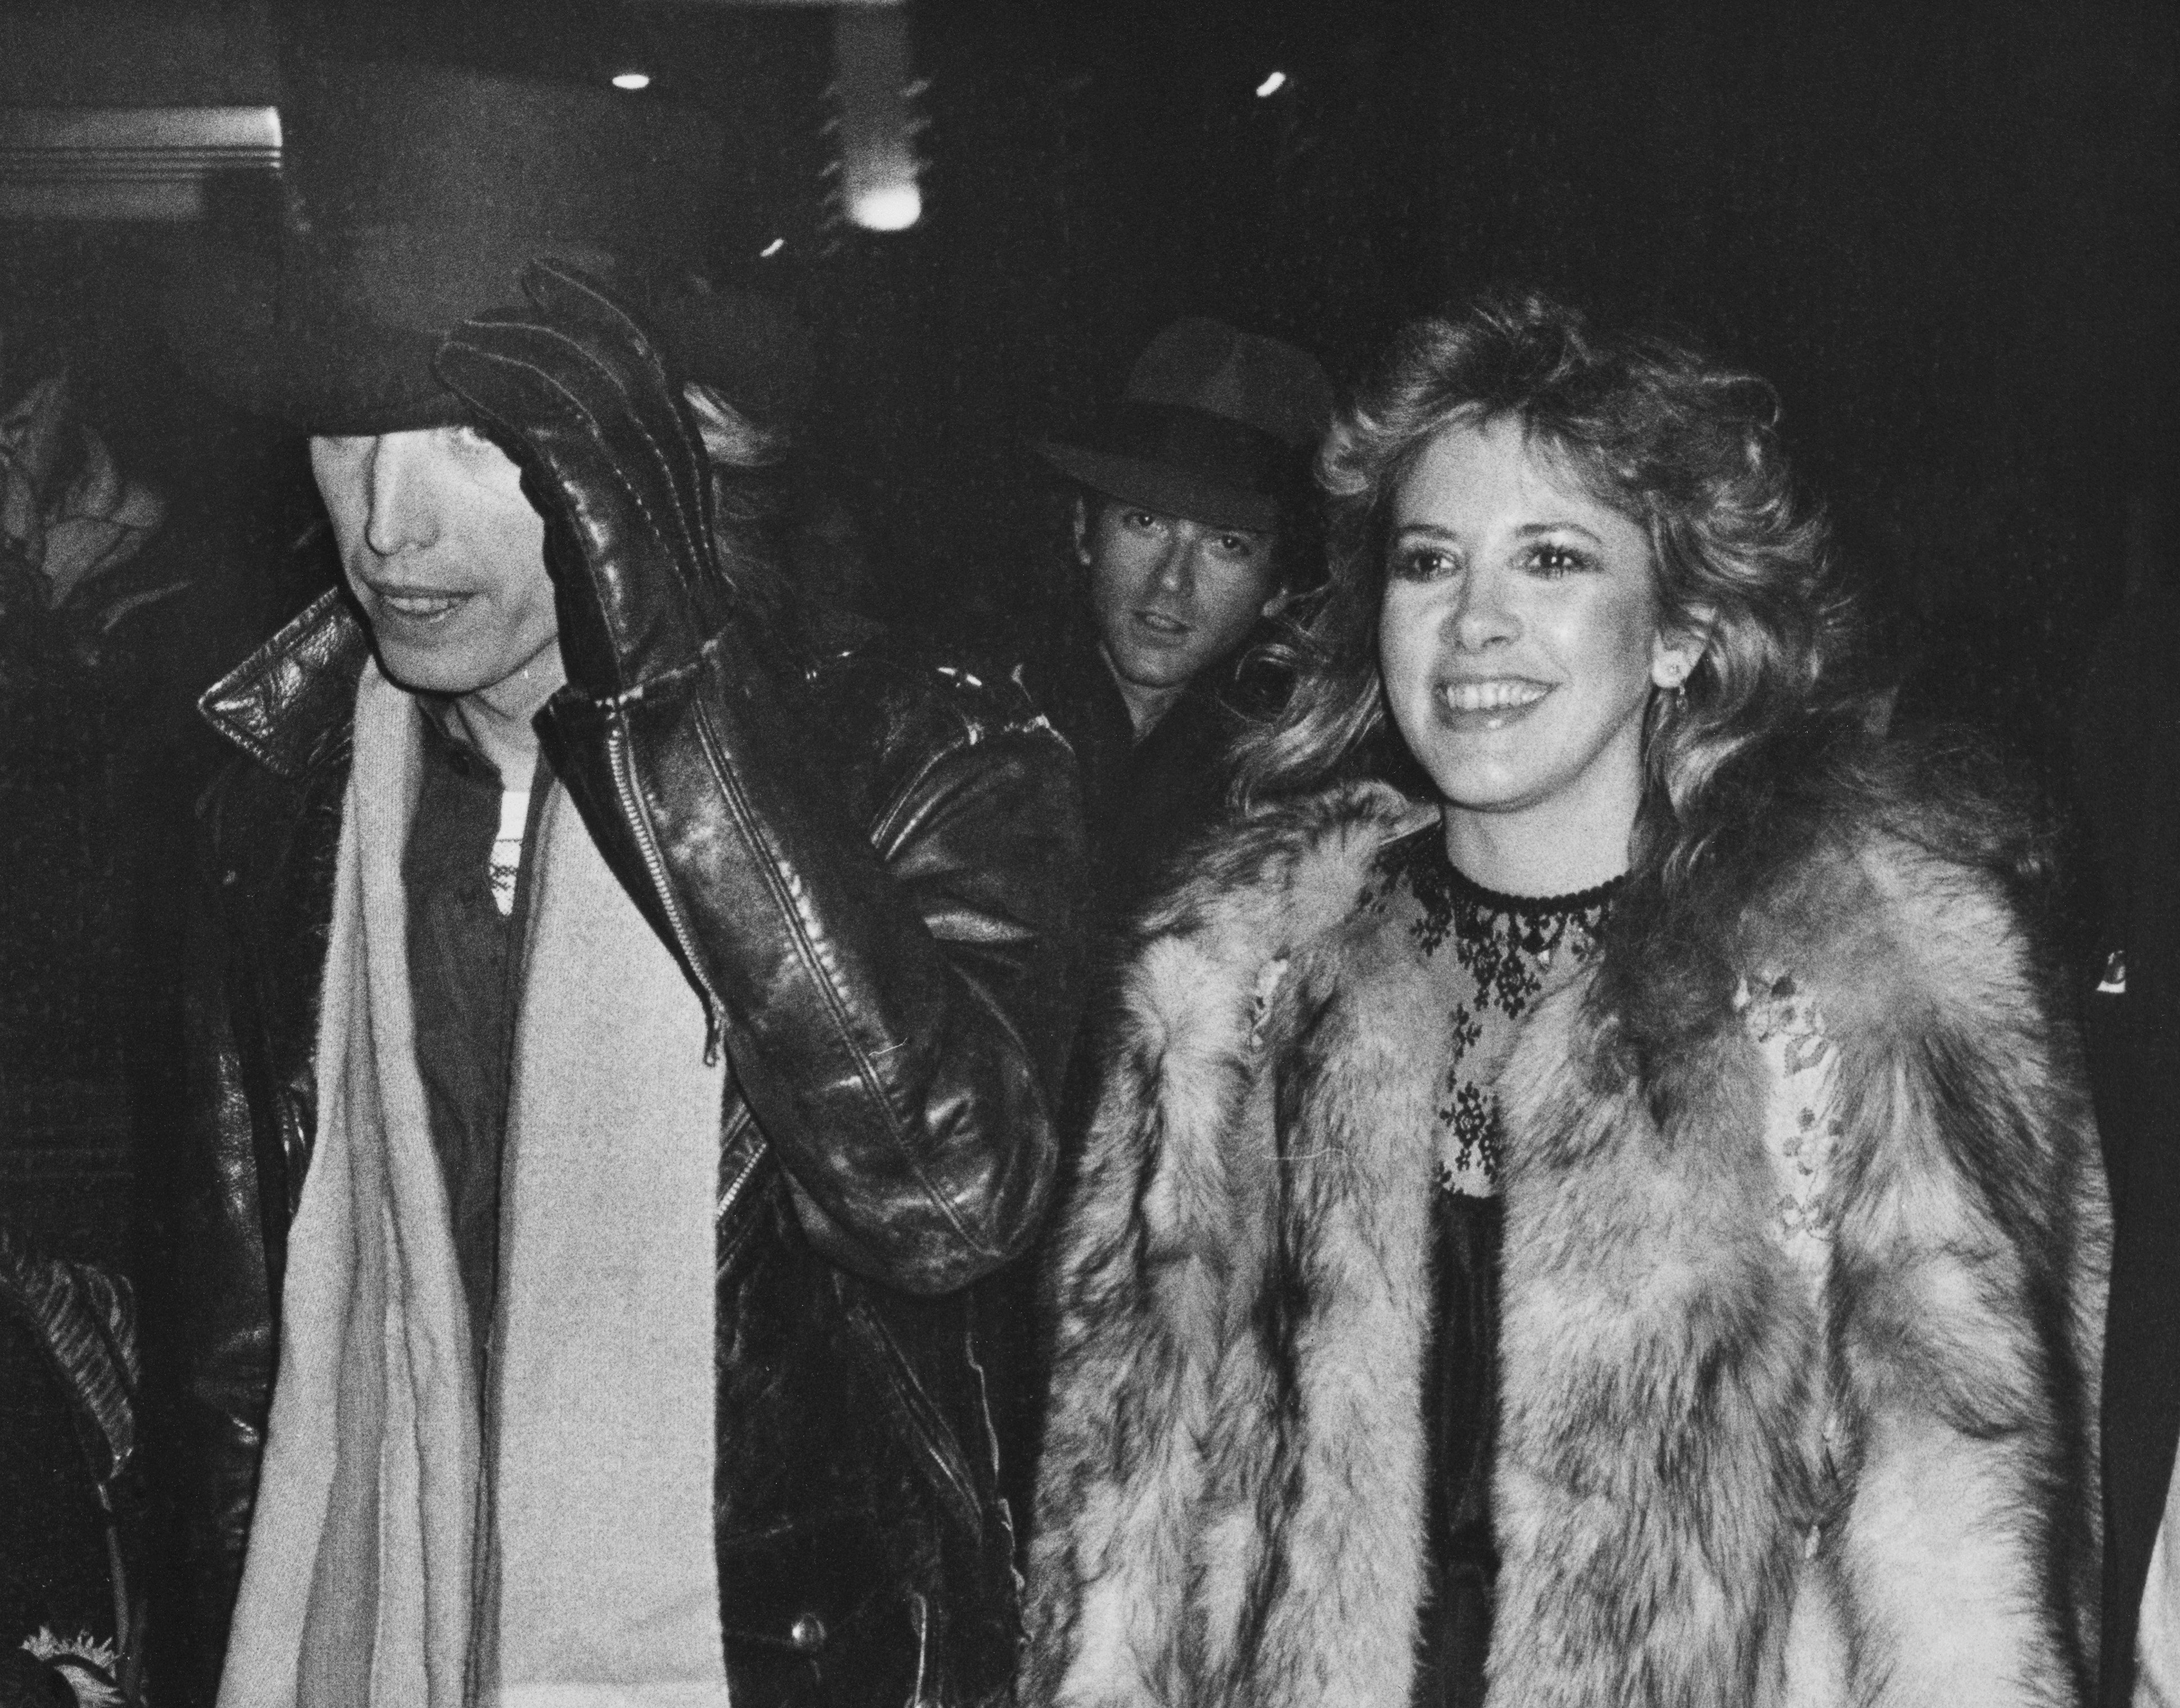 Tom Petty wears a top hat and walks with Stevie Nicks, who wears a fur coat.